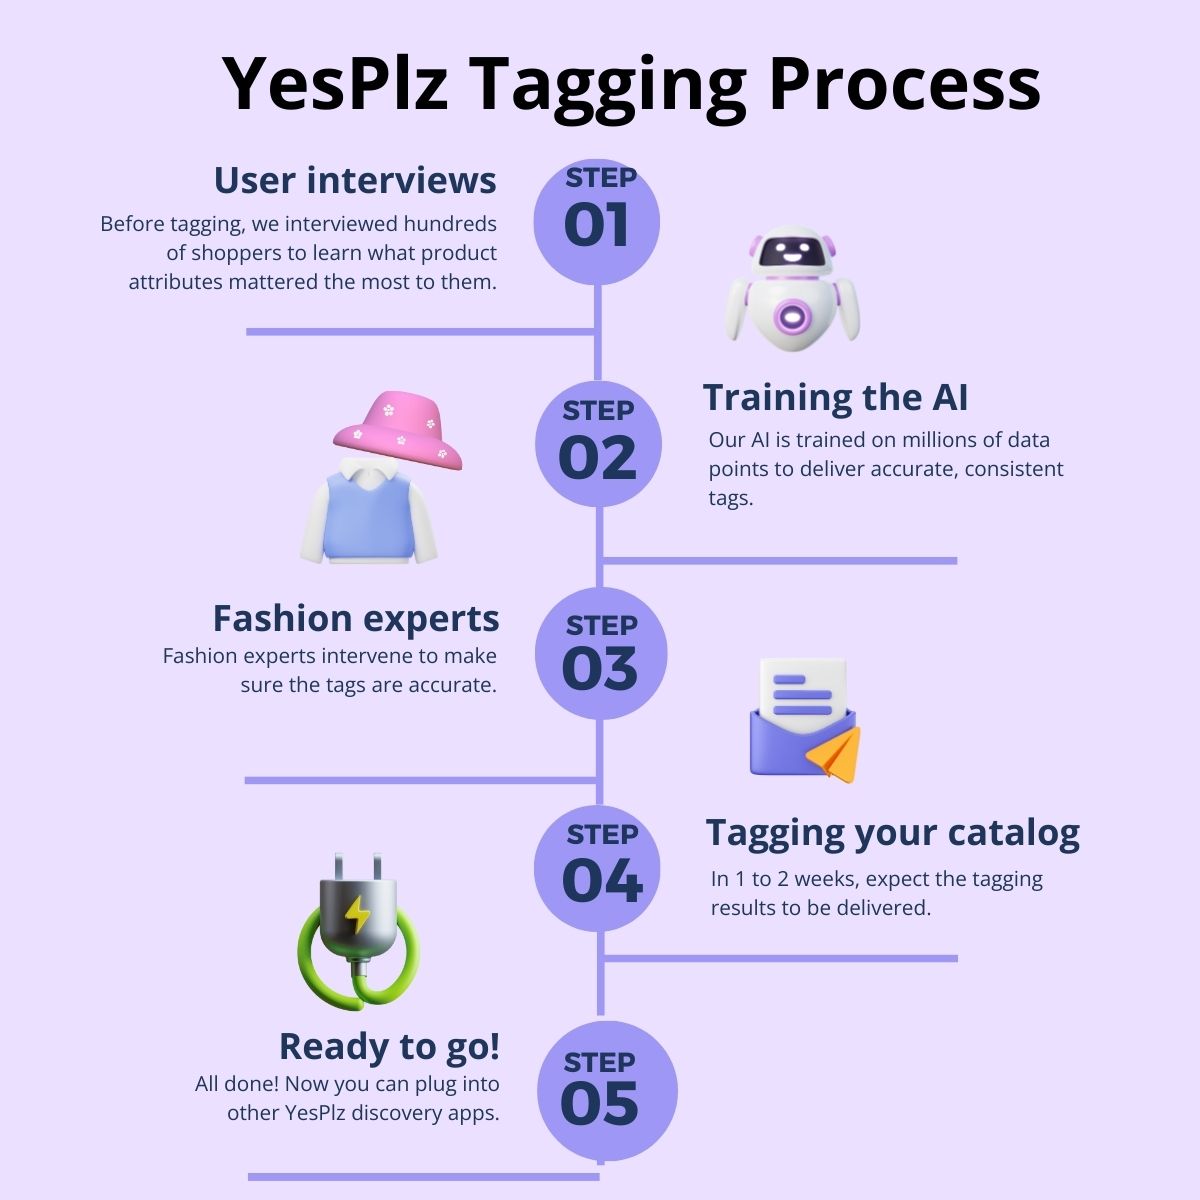 YesPlz ecommerce tagging process in 5 steps 